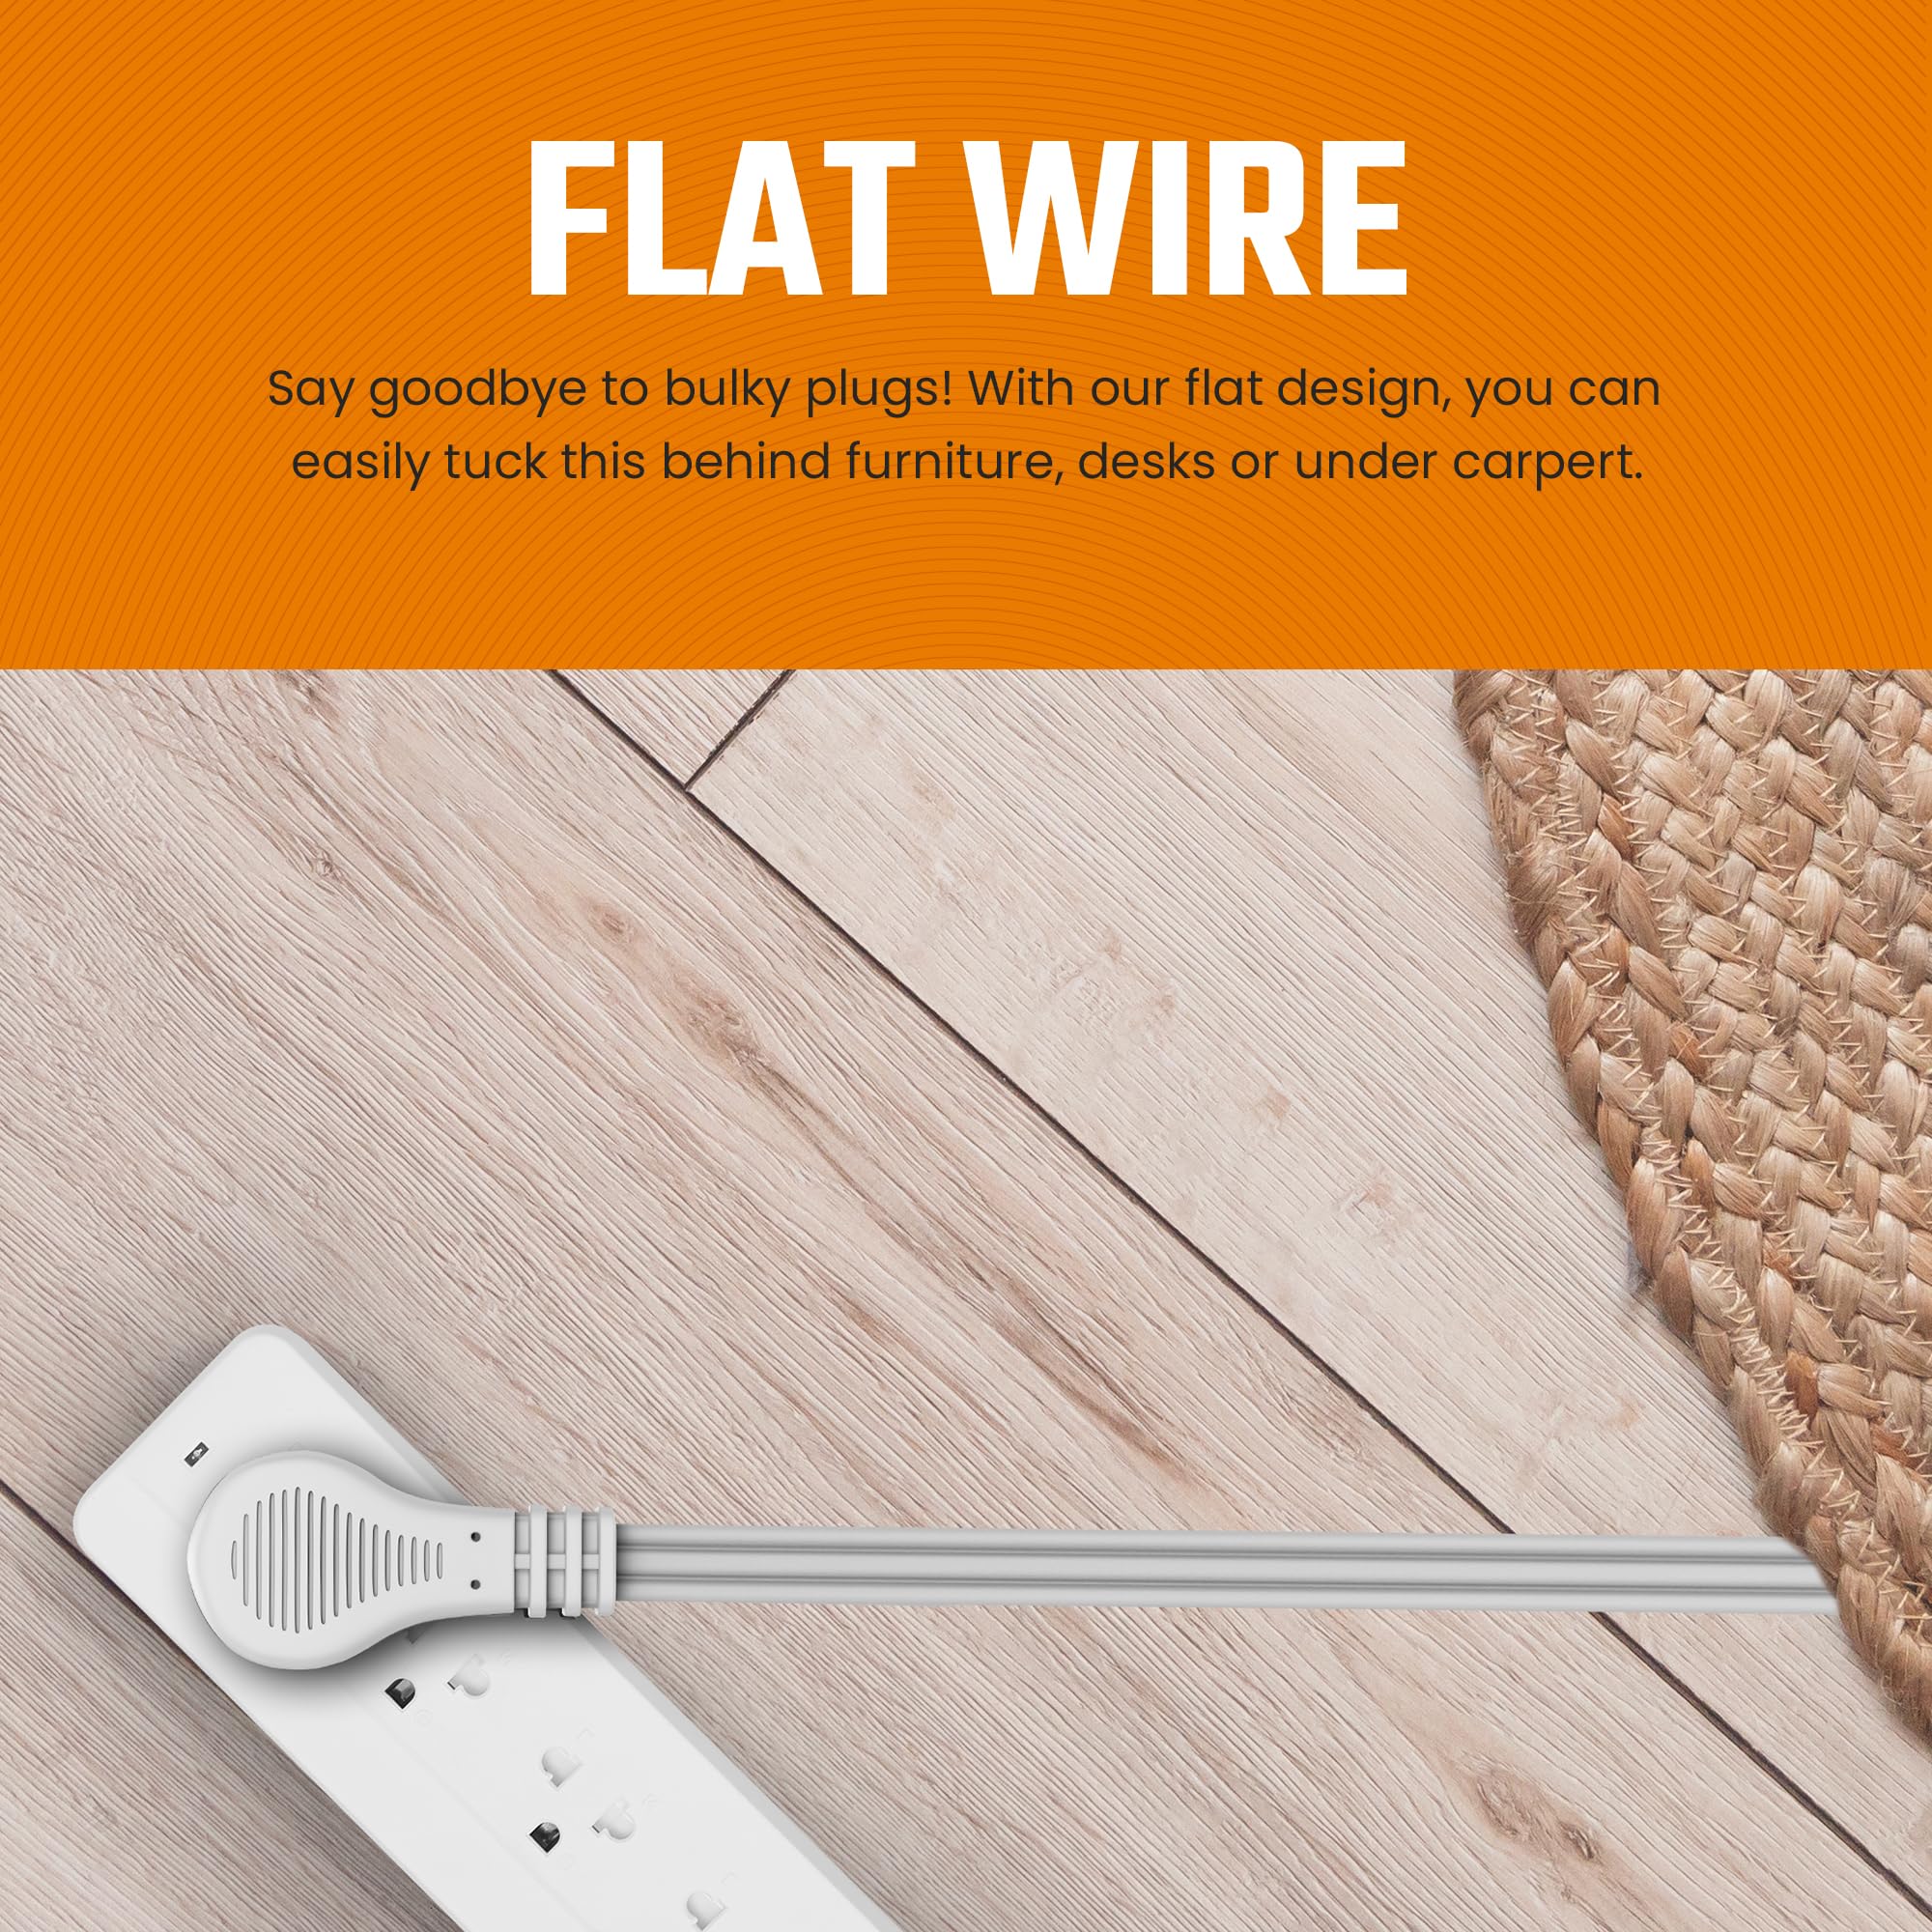 Flat 3-Outlet Extension Cord by Bindmaster- UL-Listed 3-Prong Multi Extension Wire- Space-Saving Flat Angled Extension Cord  - Very Good